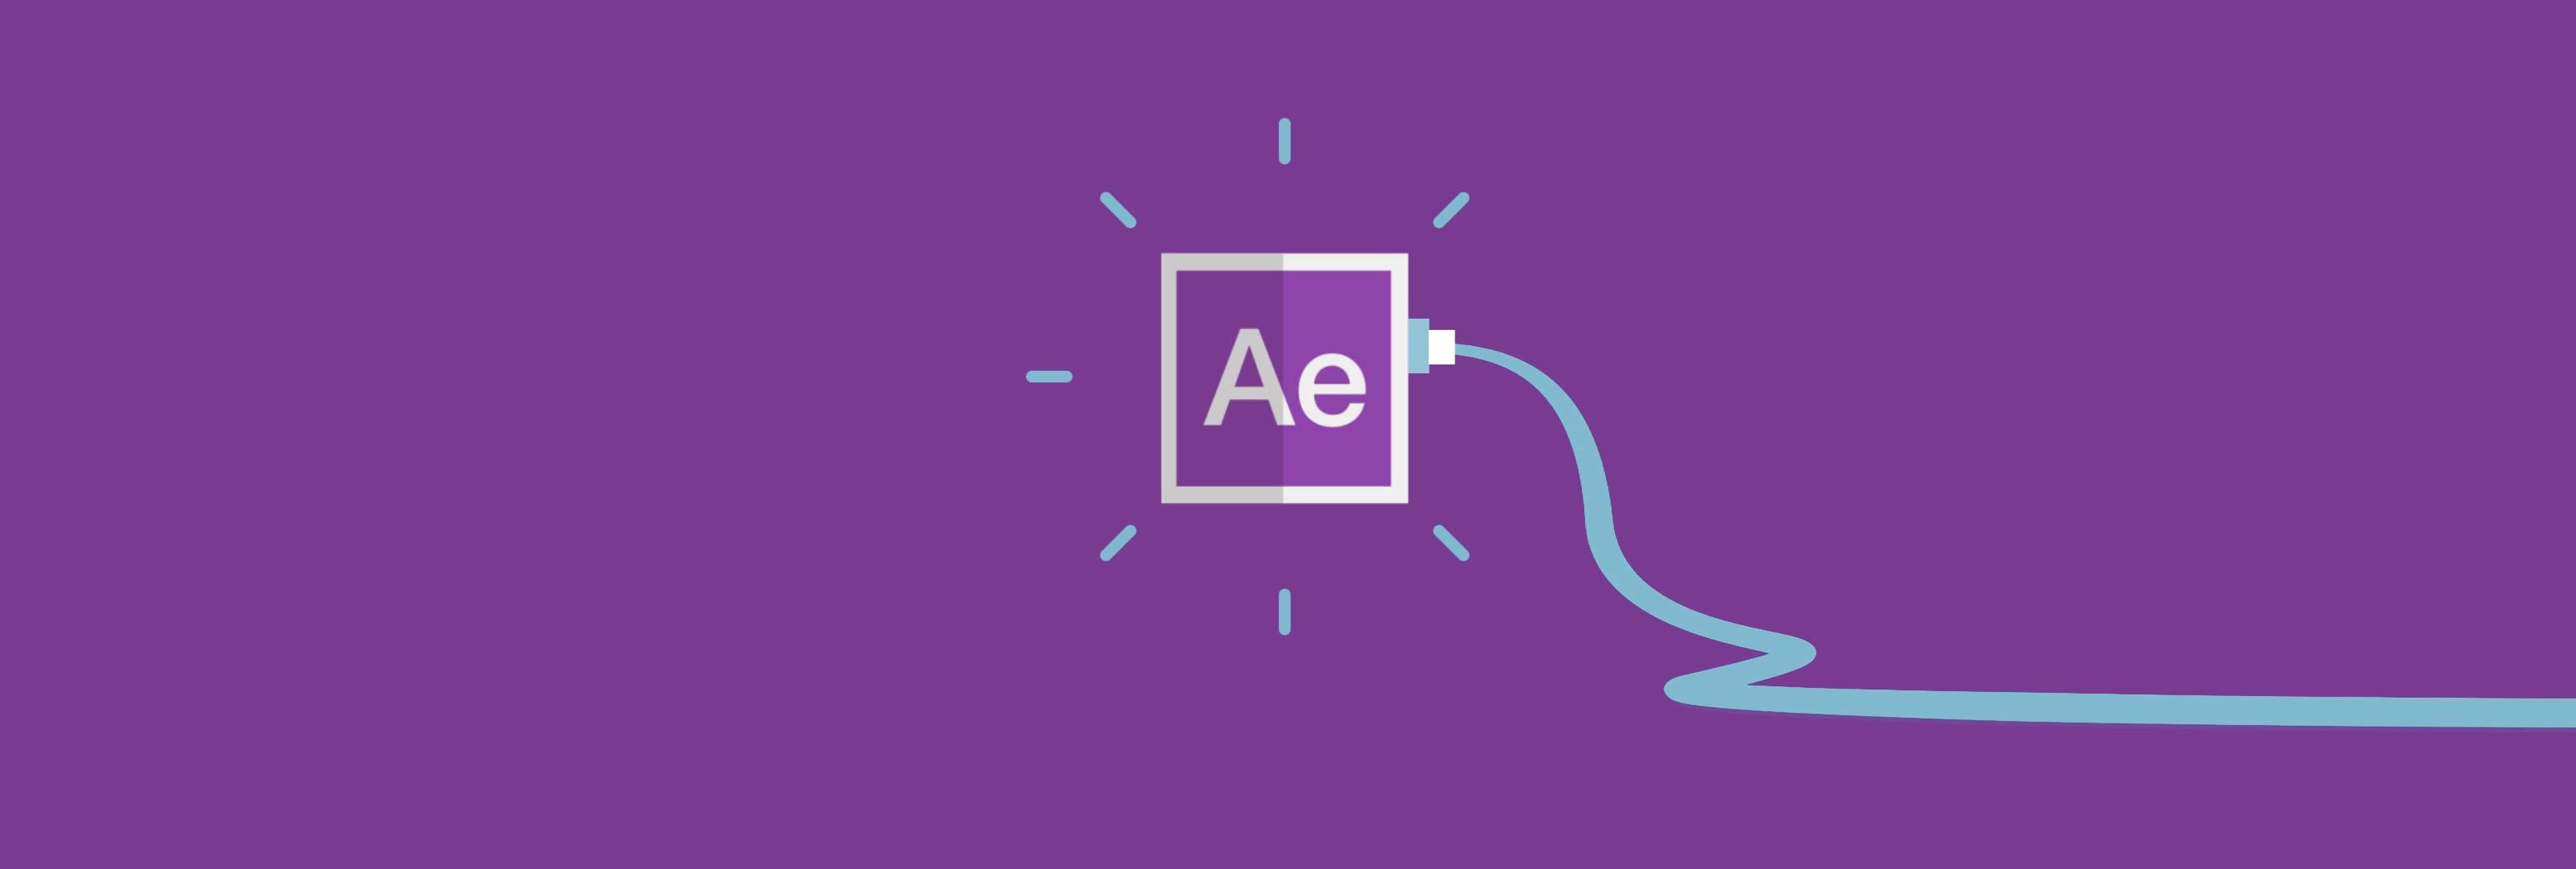 adobe after effects cs4 all plugins free download